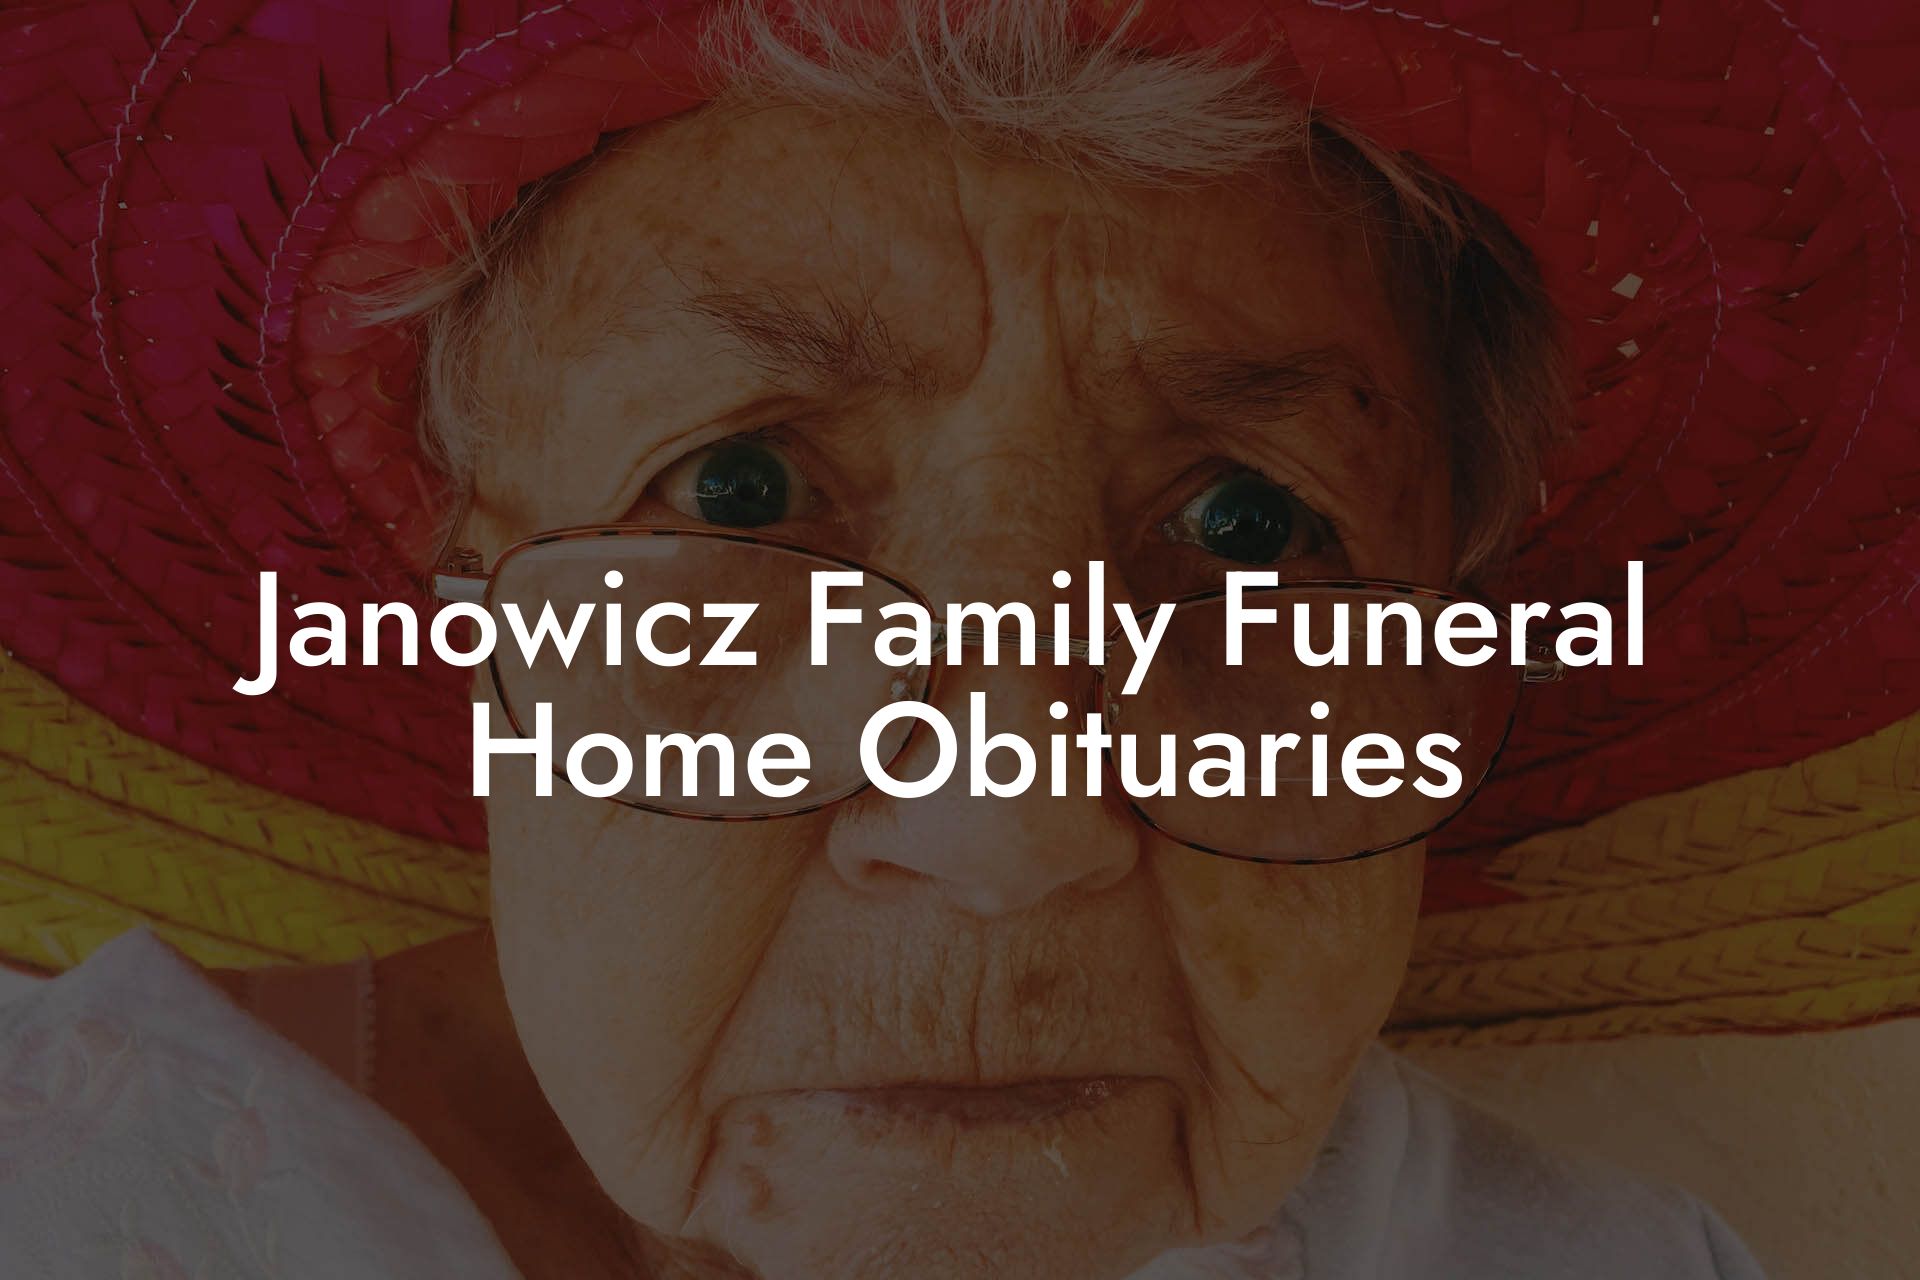 Janowicz Family Funeral Home Obituaries